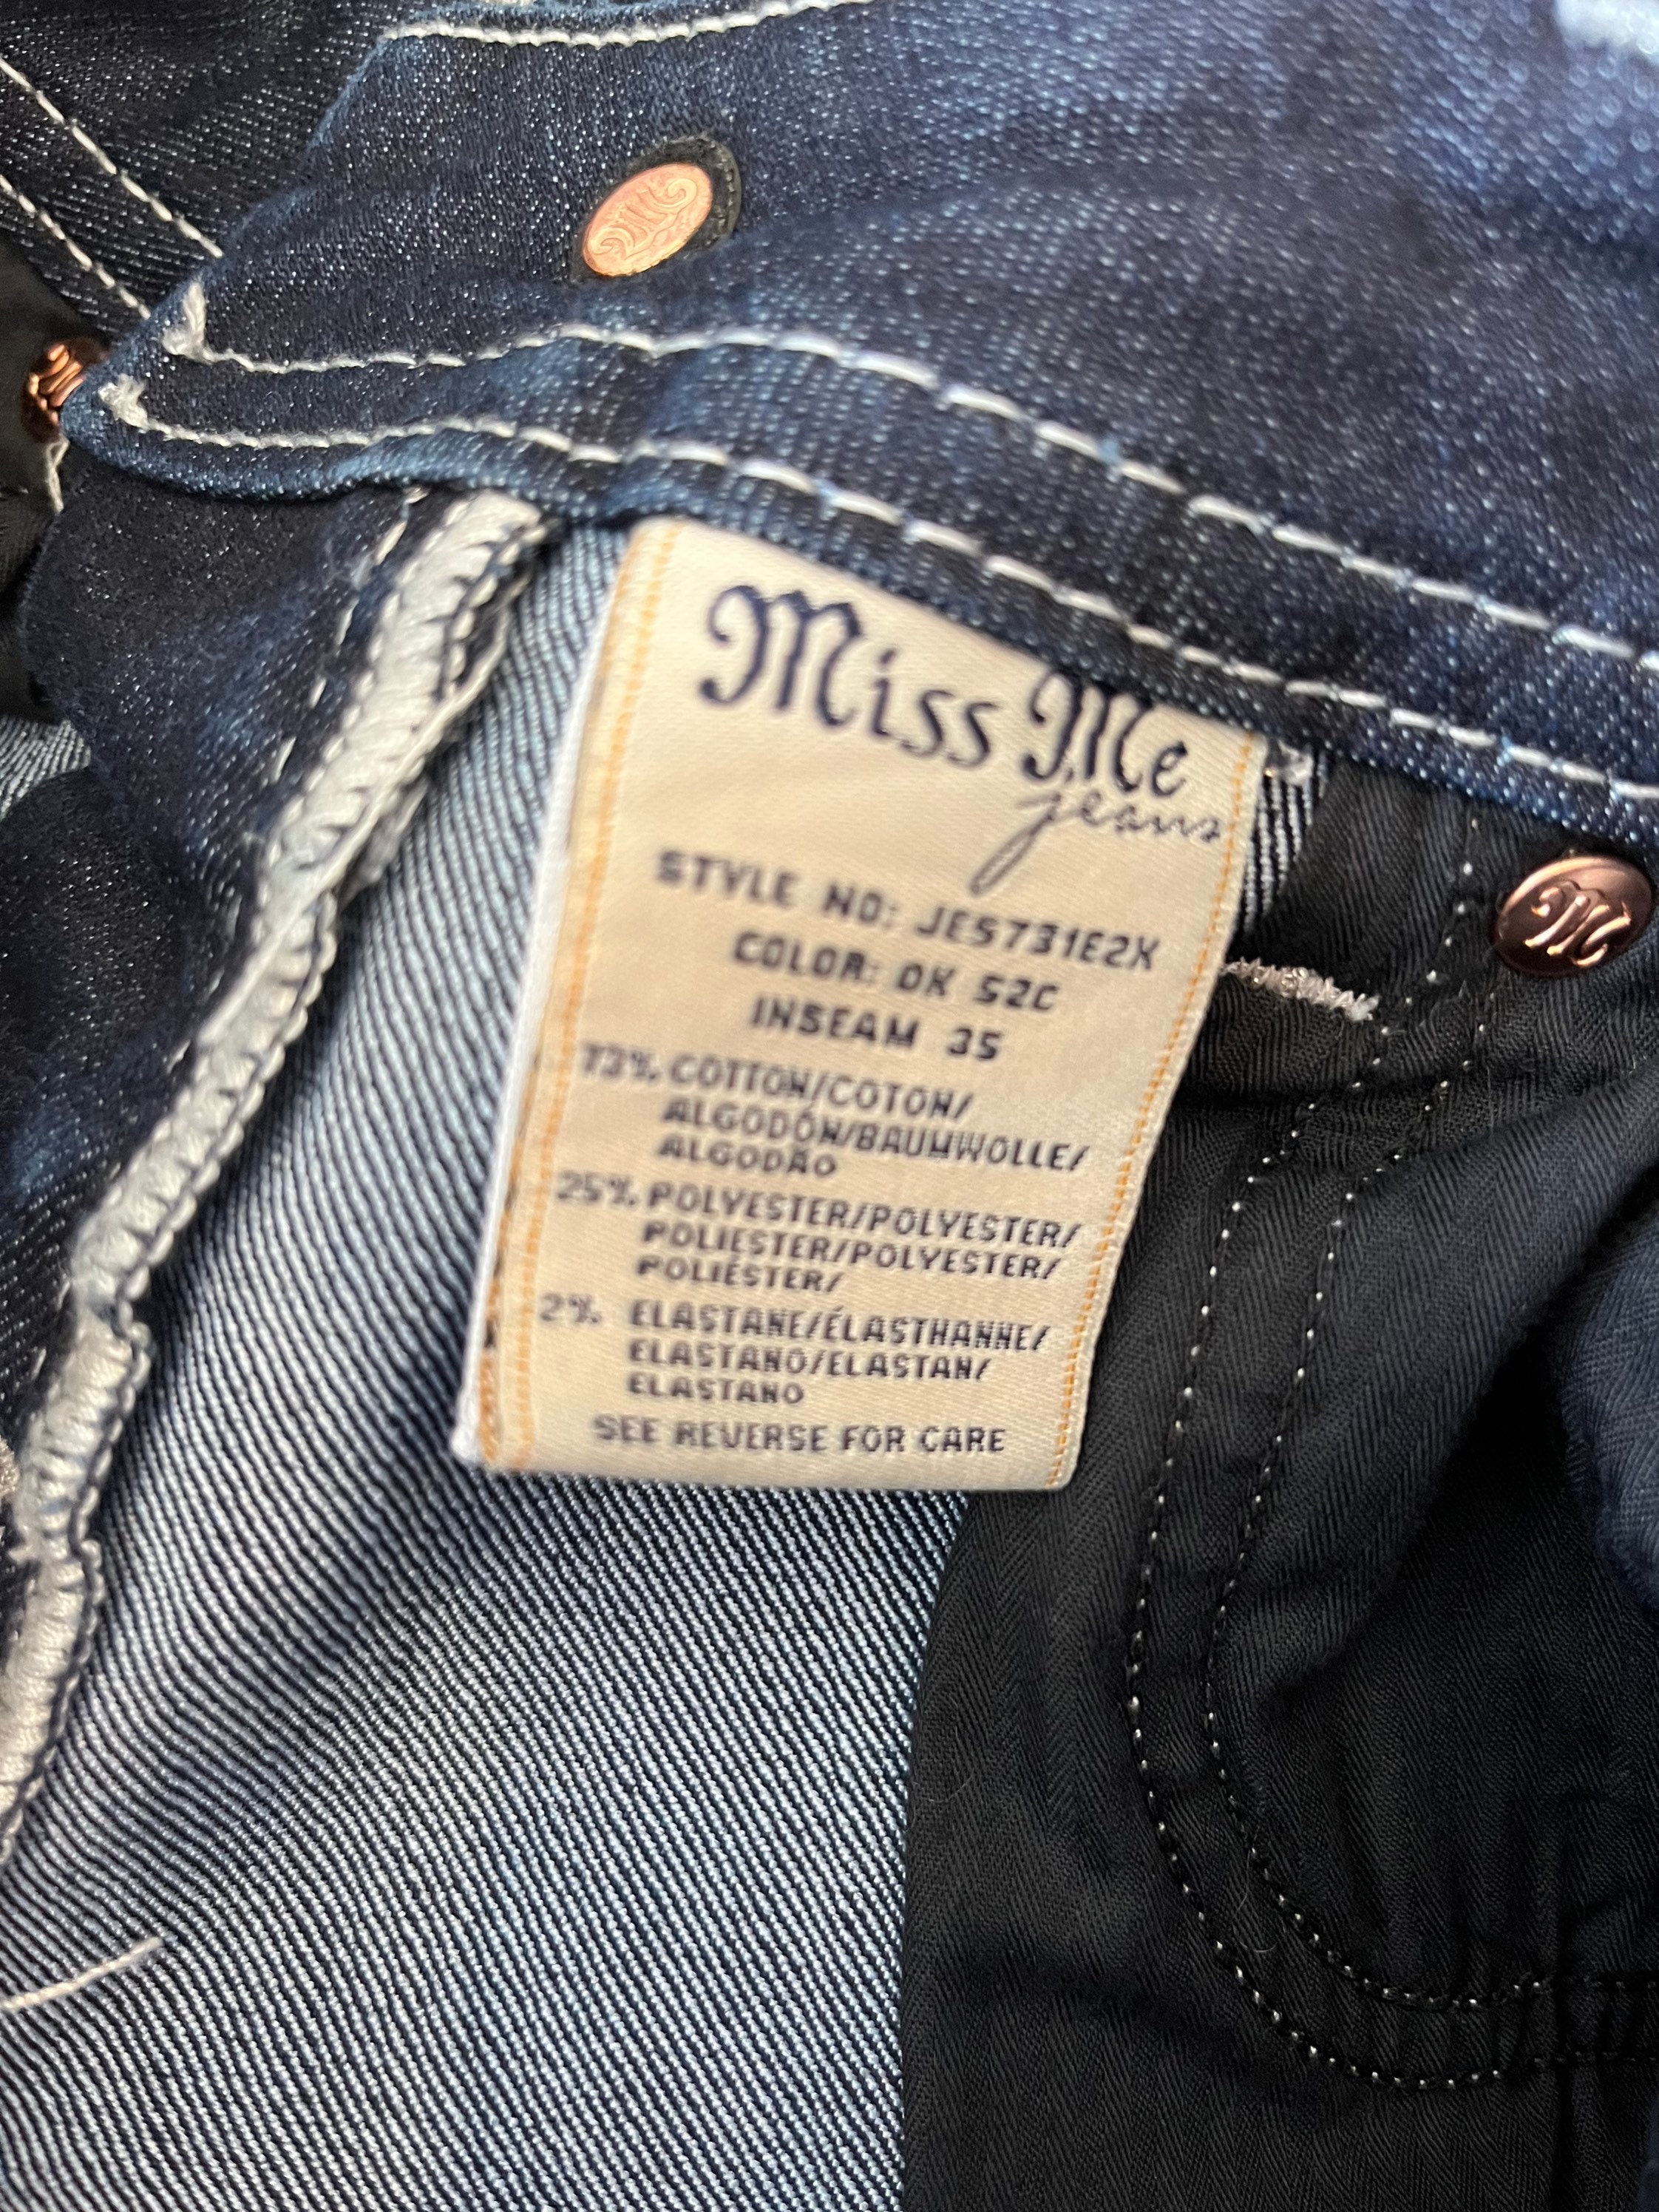 Miss Me Jeans Size 25. 35 Inseam Brand Ready to - Etsy